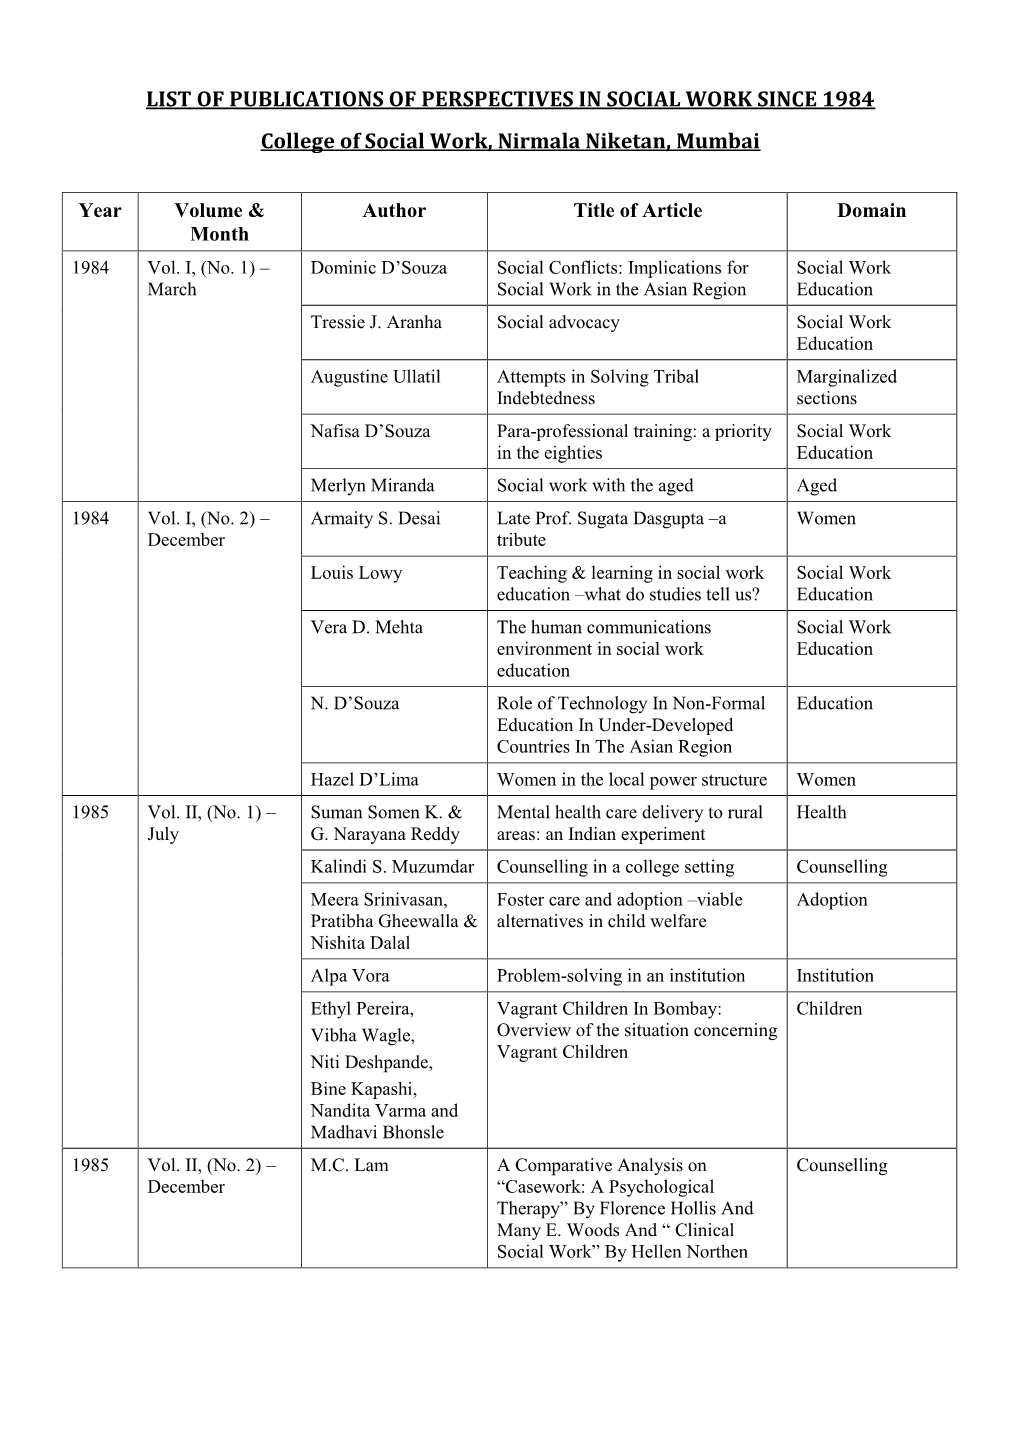 LIST of PUBLICATIONS of PERSPECTIVES in SOCIAL WORK SINCE 1984 College of Social Work, Nirmala Niketan, Mumbai